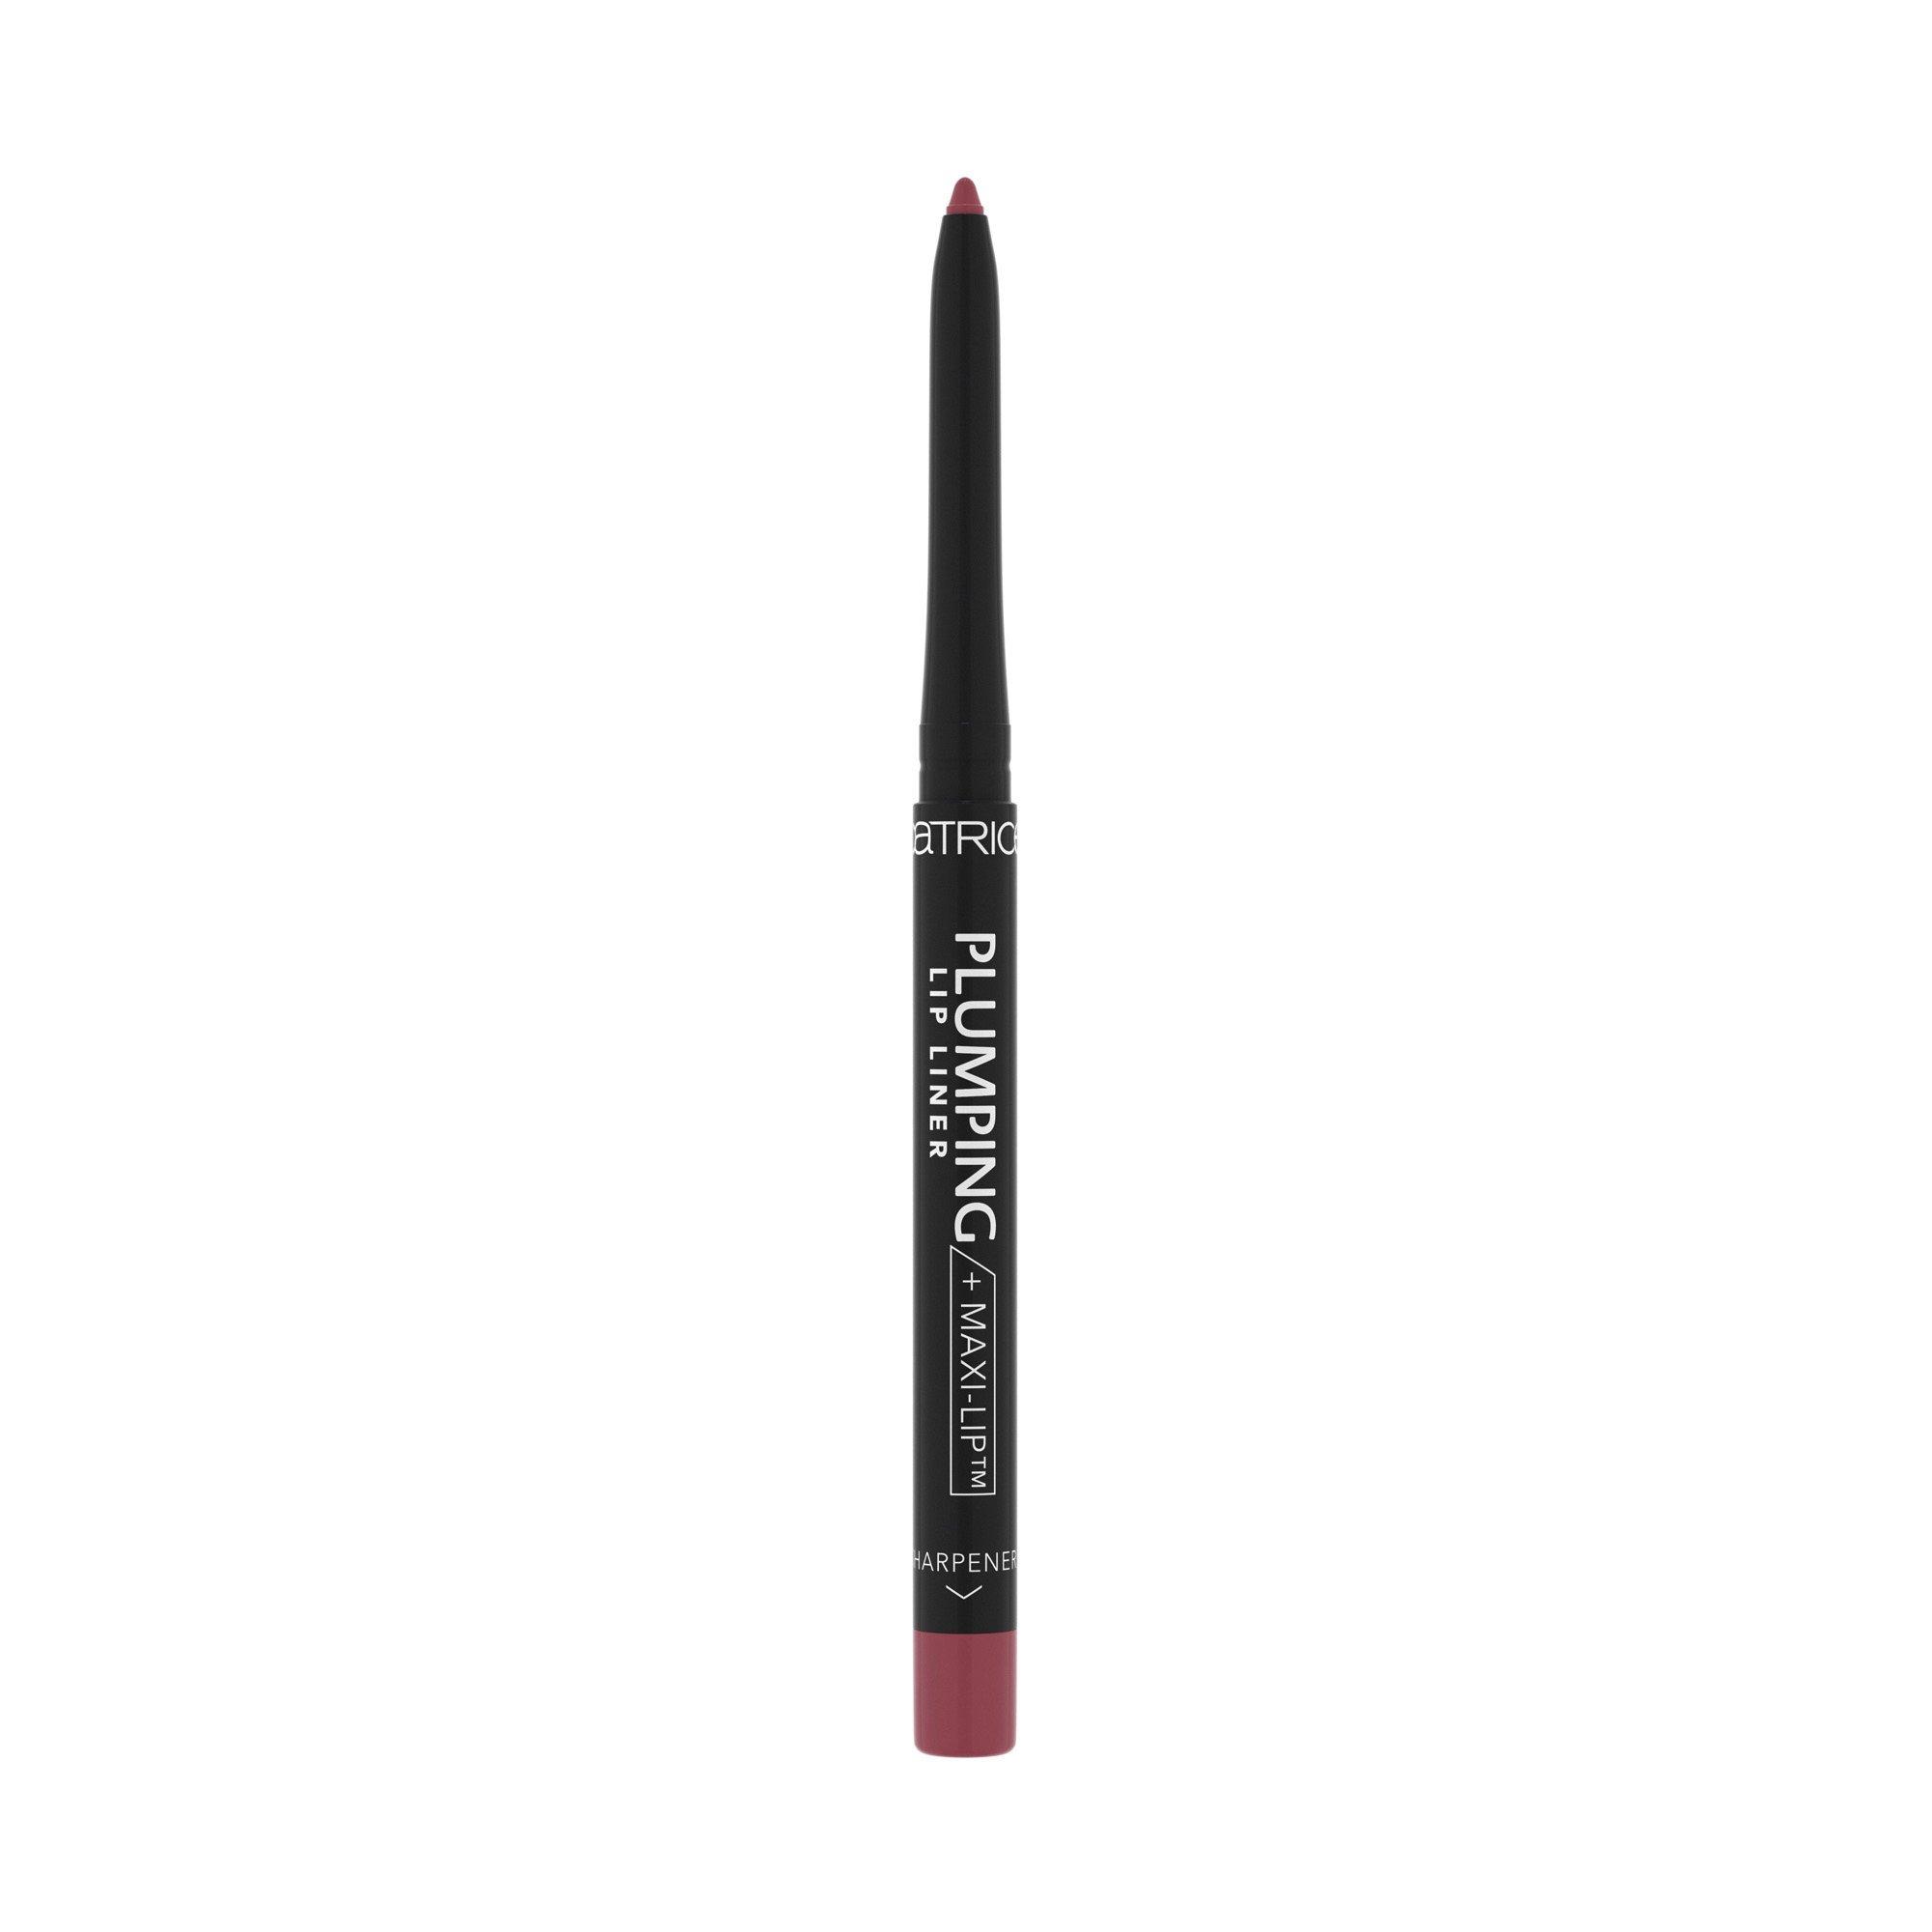 Image of CATRICE Catrice Plumping Lip Liner 060 Plumping Lip Liner - 0.35G